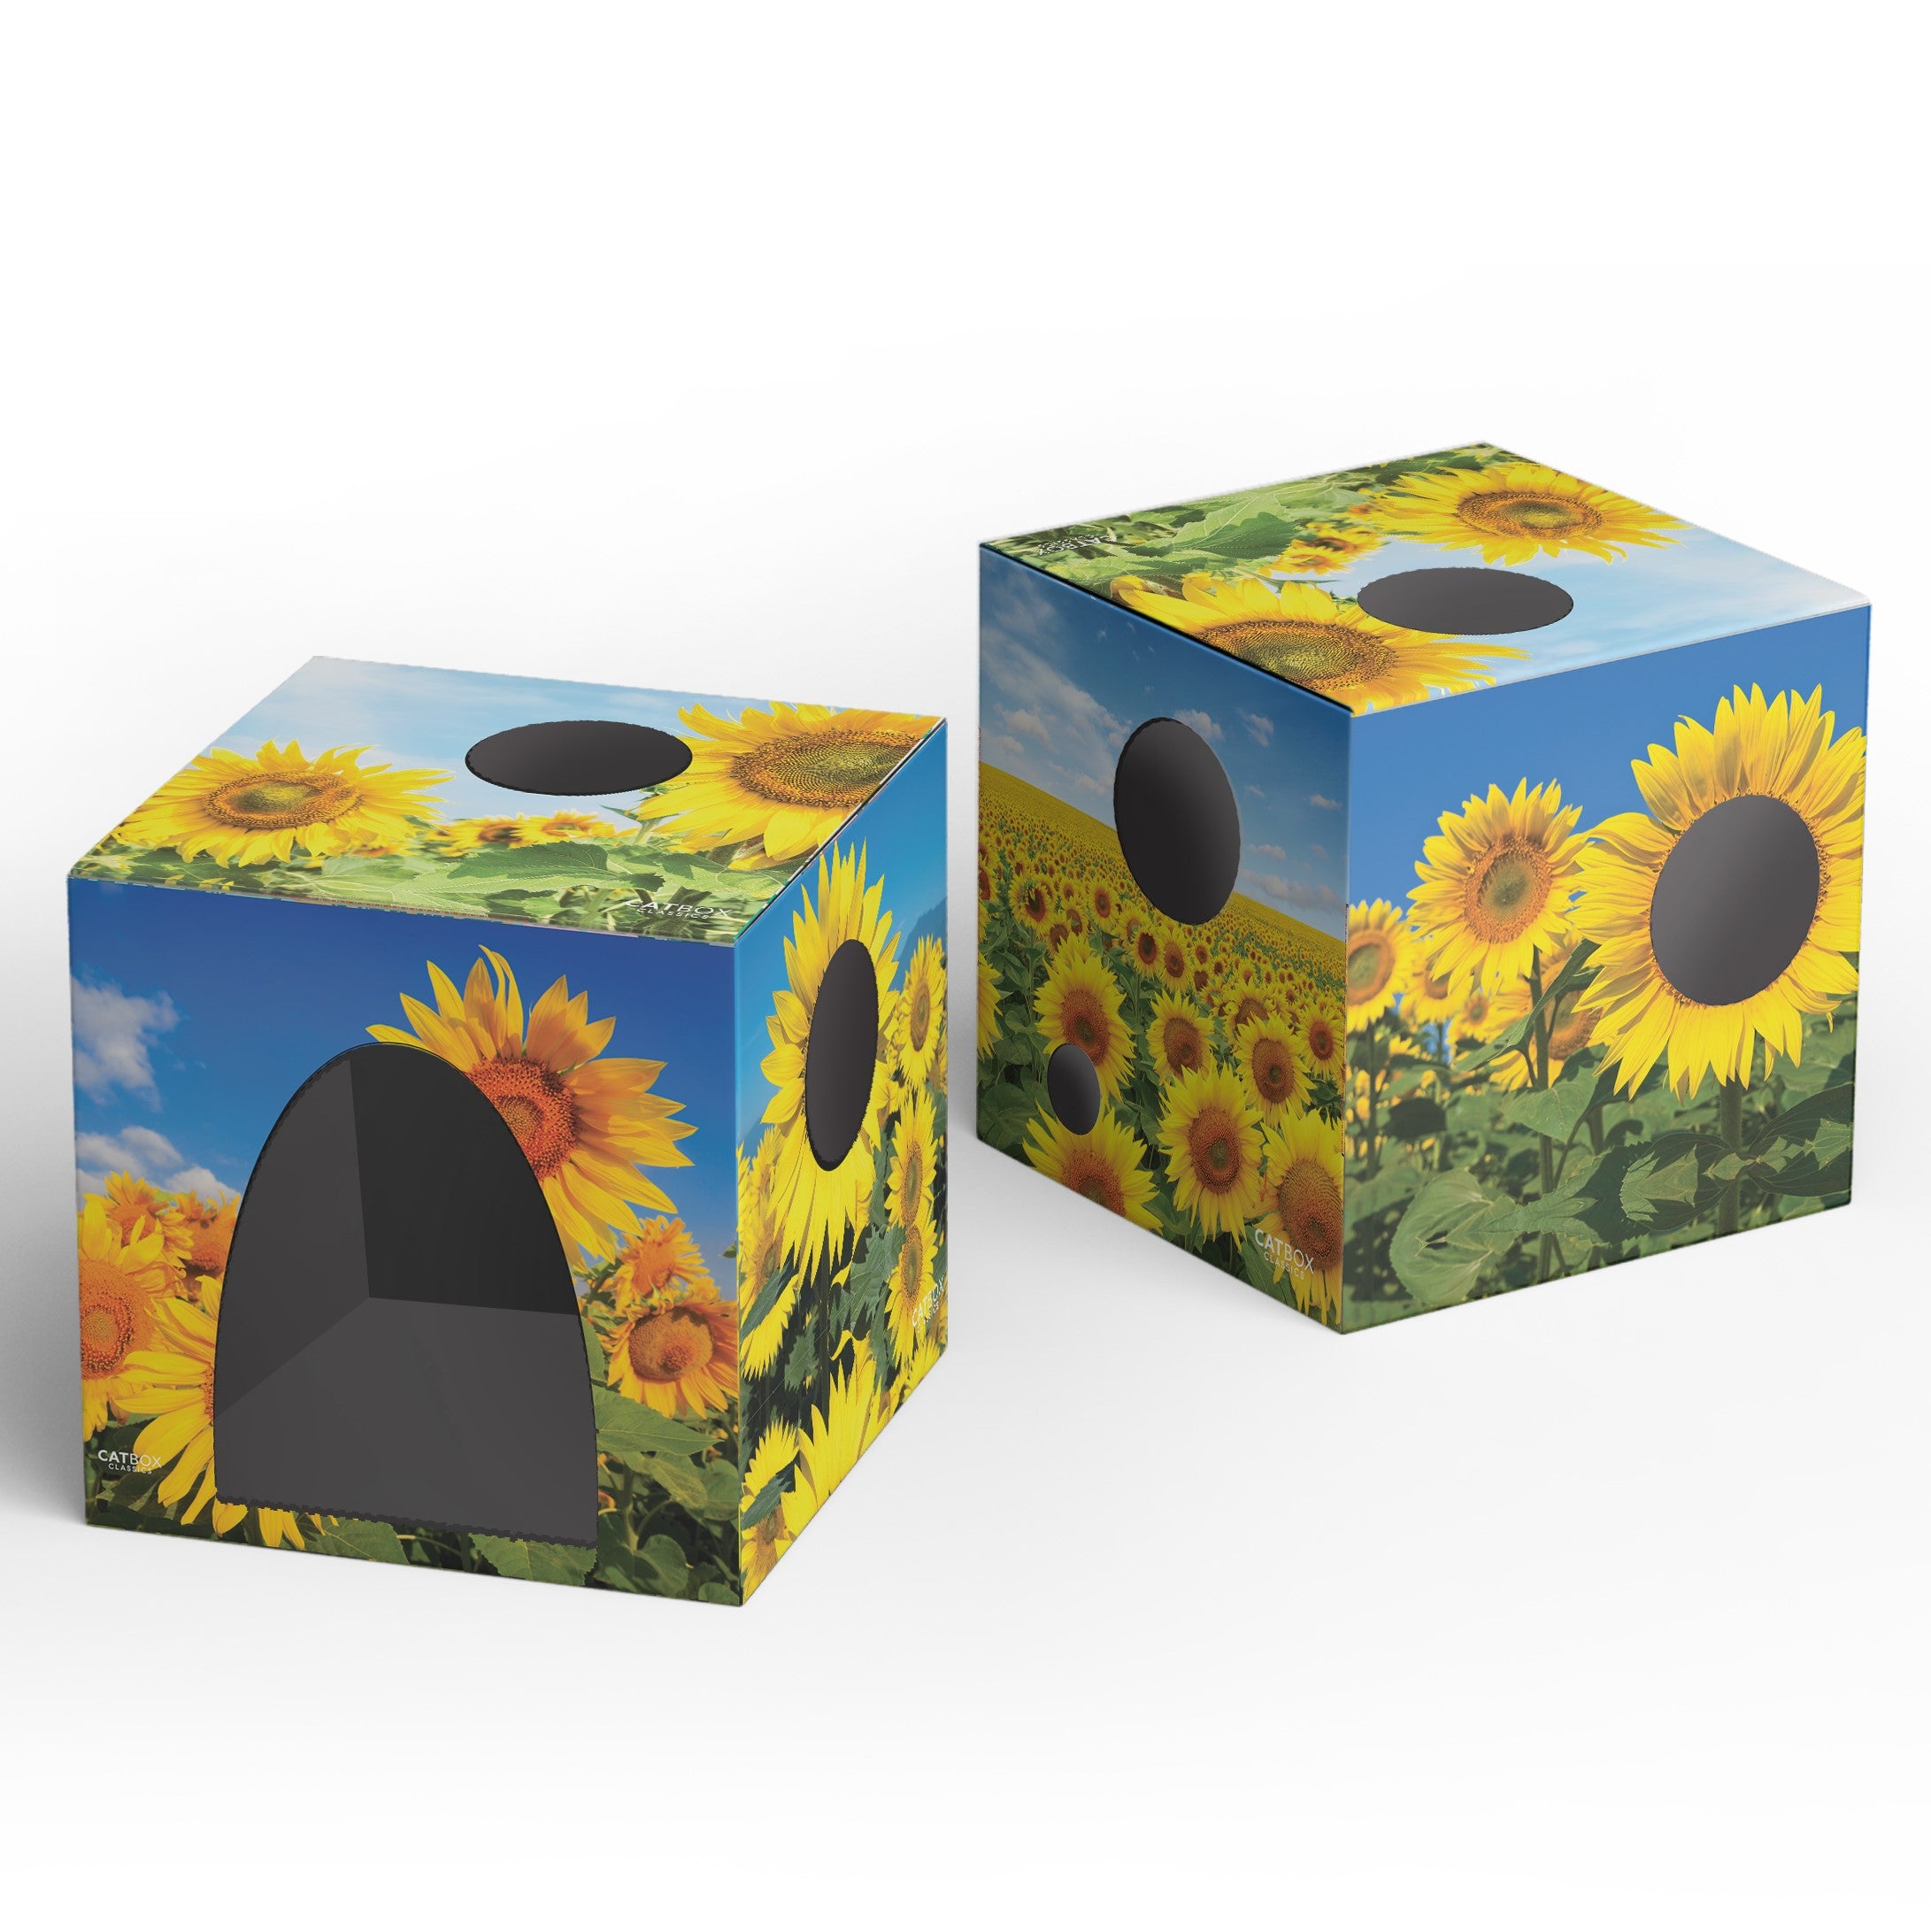 Sunflowers Cardboard Cat House with Scratcher